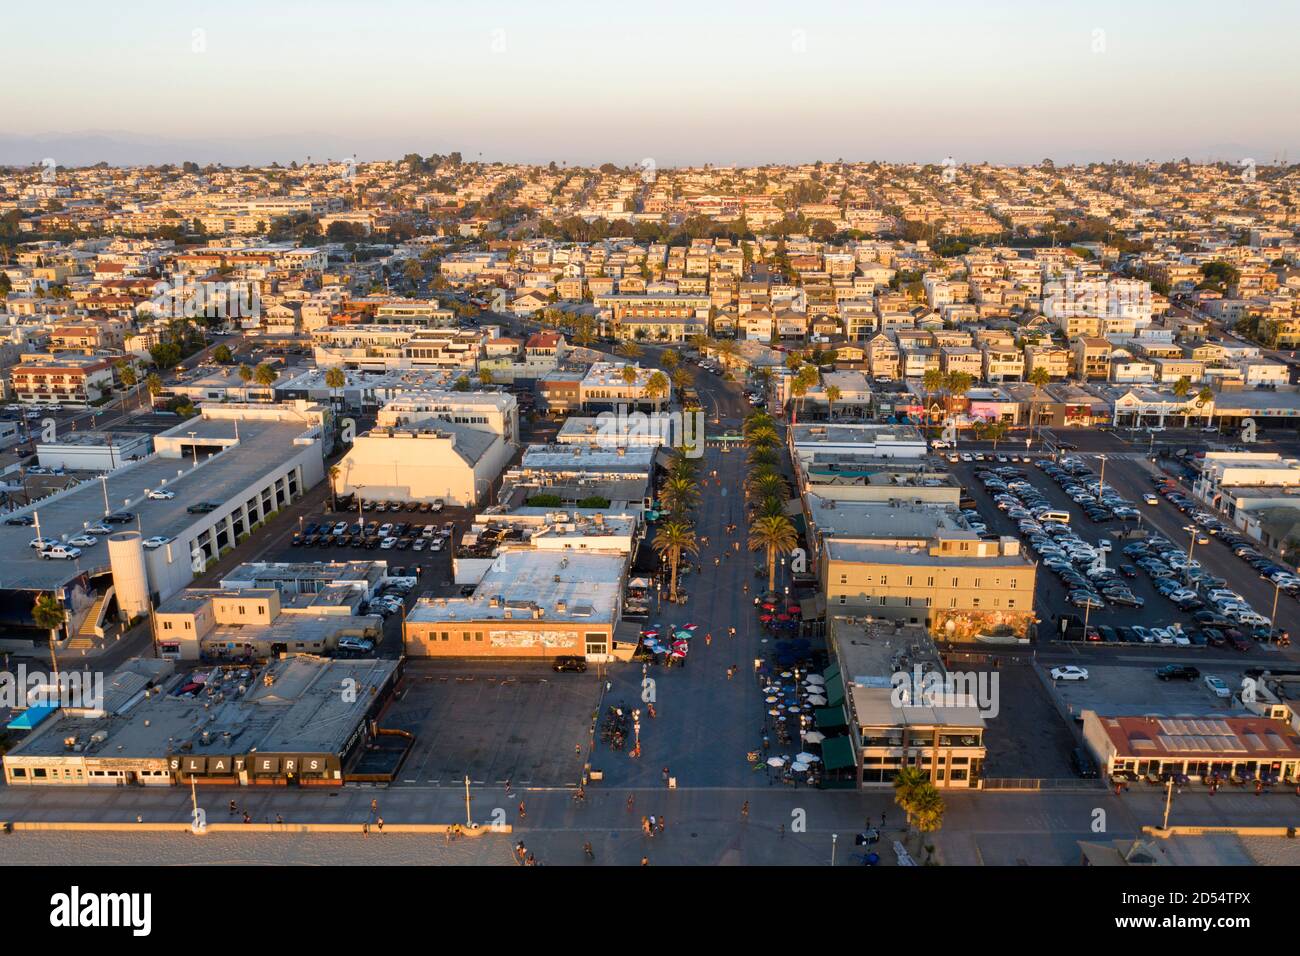 Aerial view of Pier Avenue restaurants and shops in downtown coastal Hermosa Beach, California Stock Photo